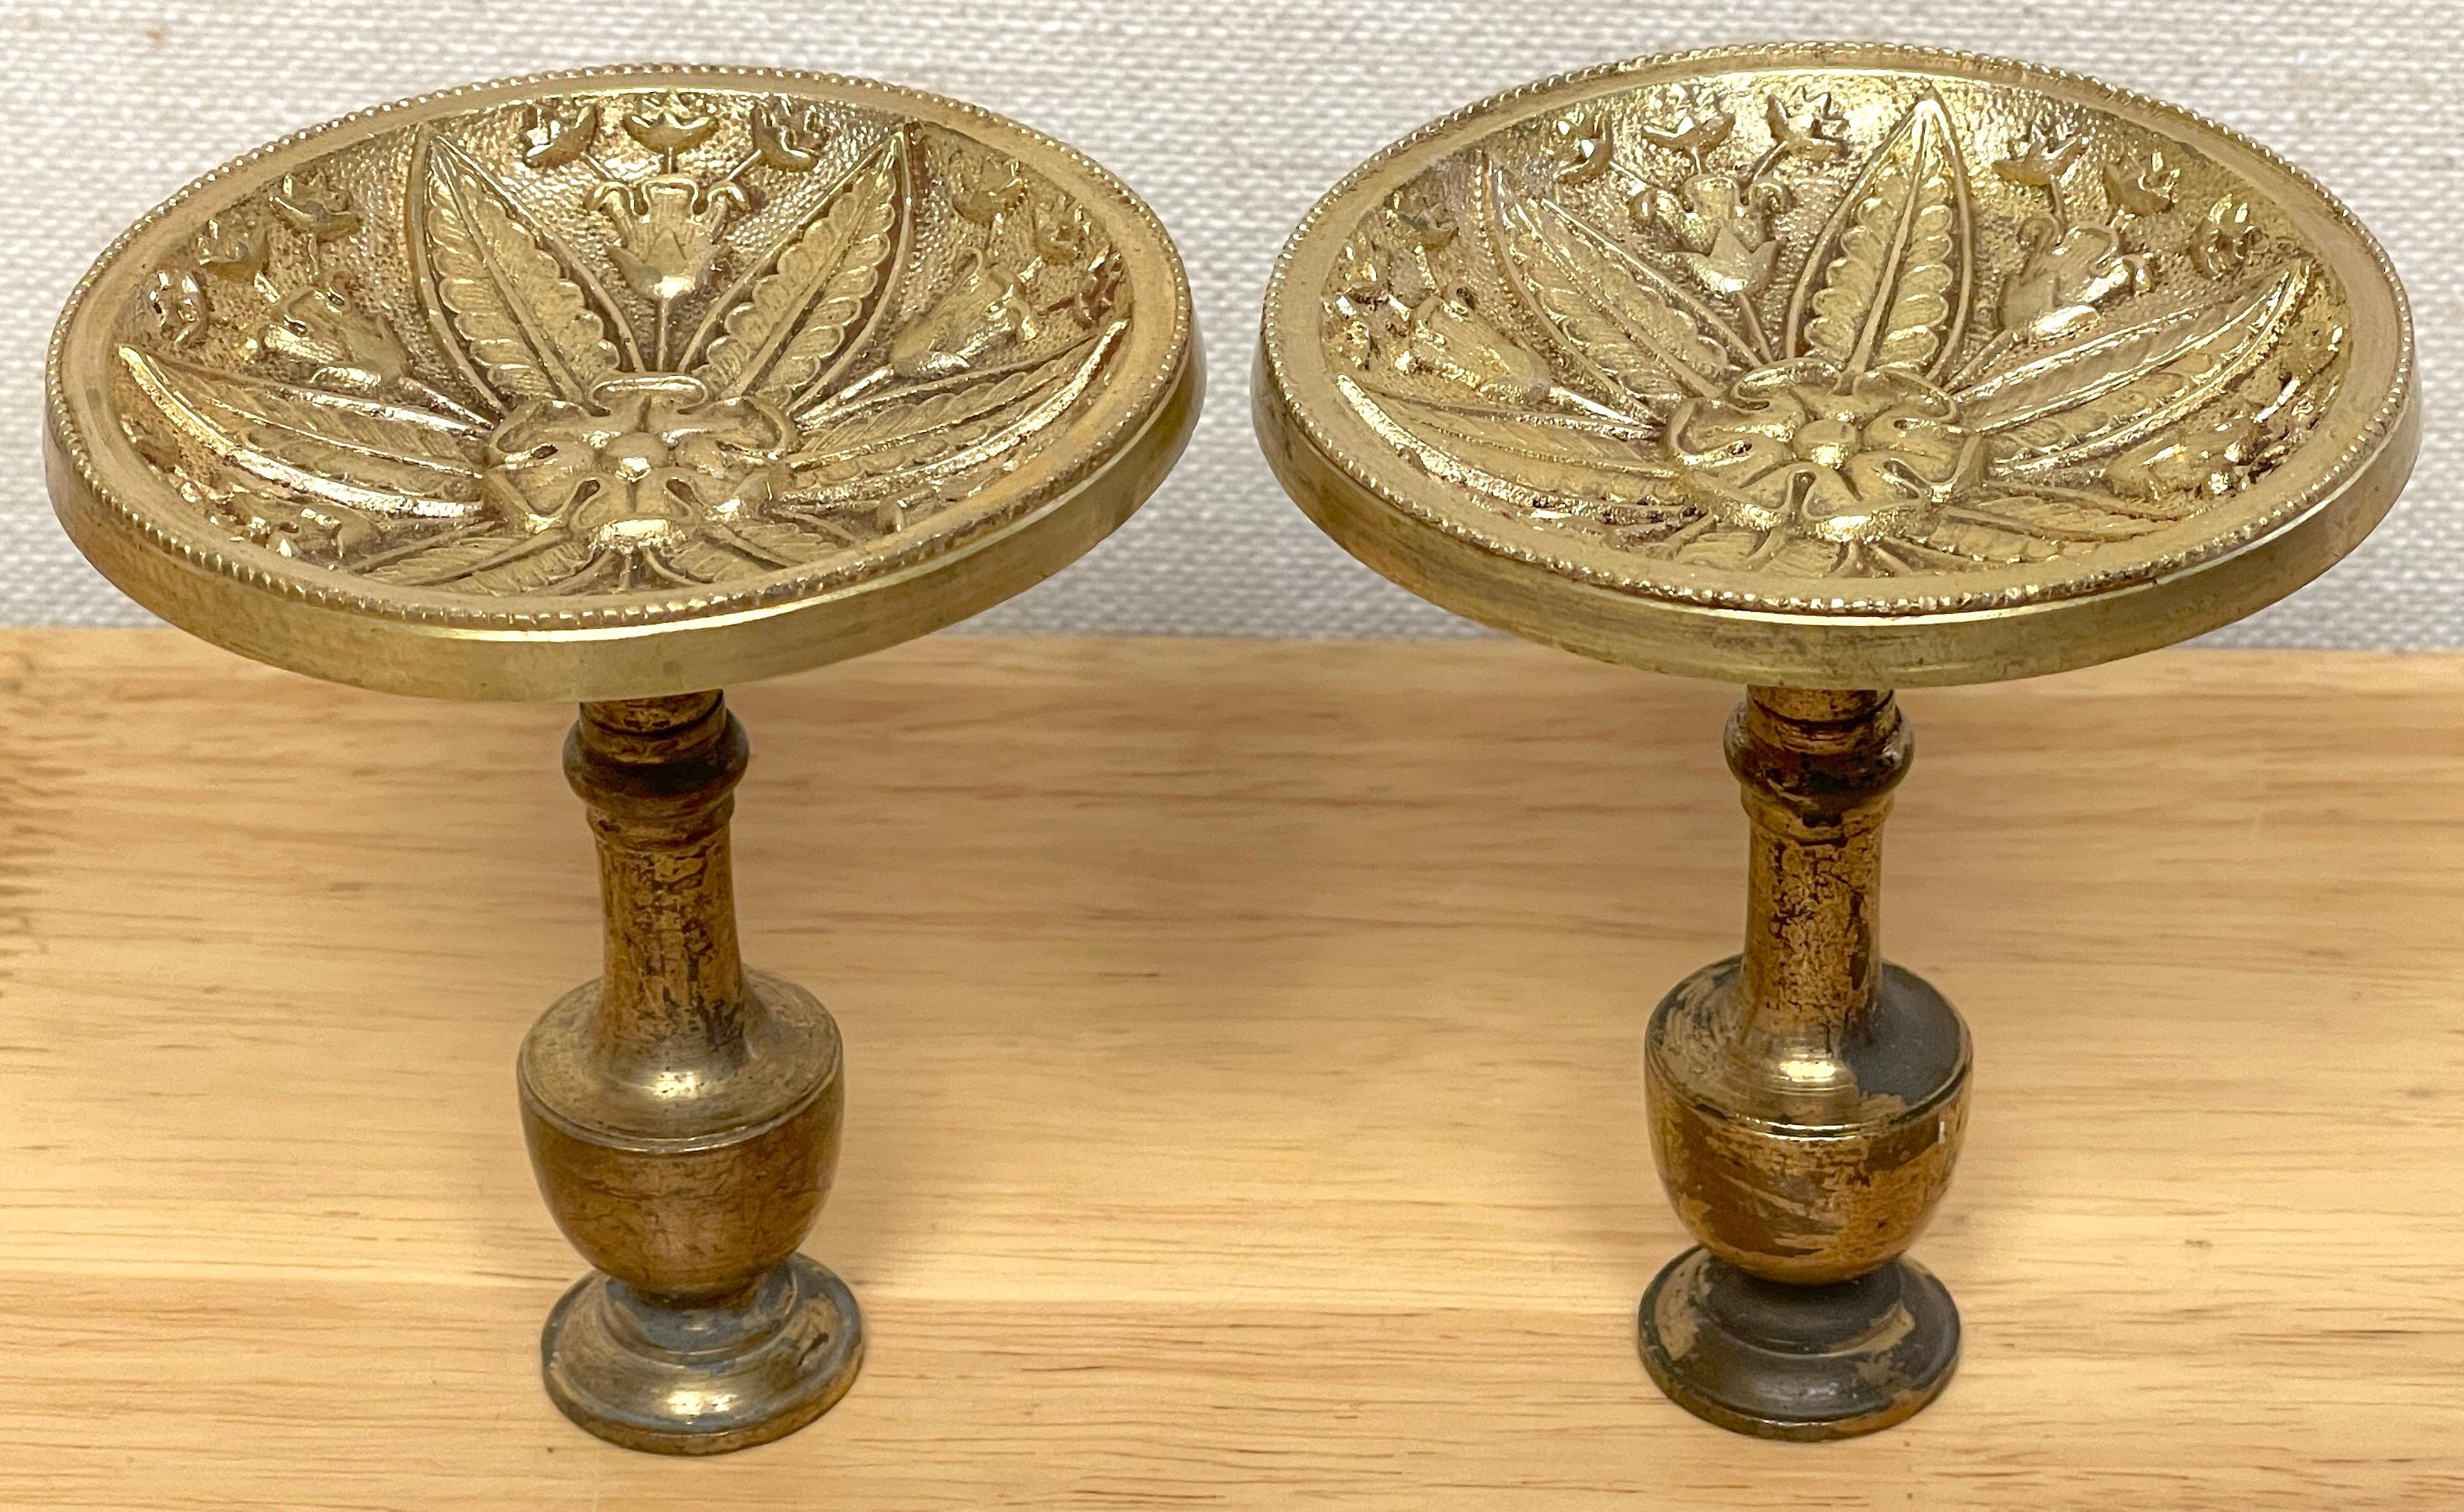 Pair of 19th century Empire Ormolu Acanthus Motif curtain tie backs
France, 19th Century 
A splendid pair of French Empire Ormolu acanthus motif curtain tie backs. Of typical circular form, with fine chasing and engraving. Both tiebacks retain the